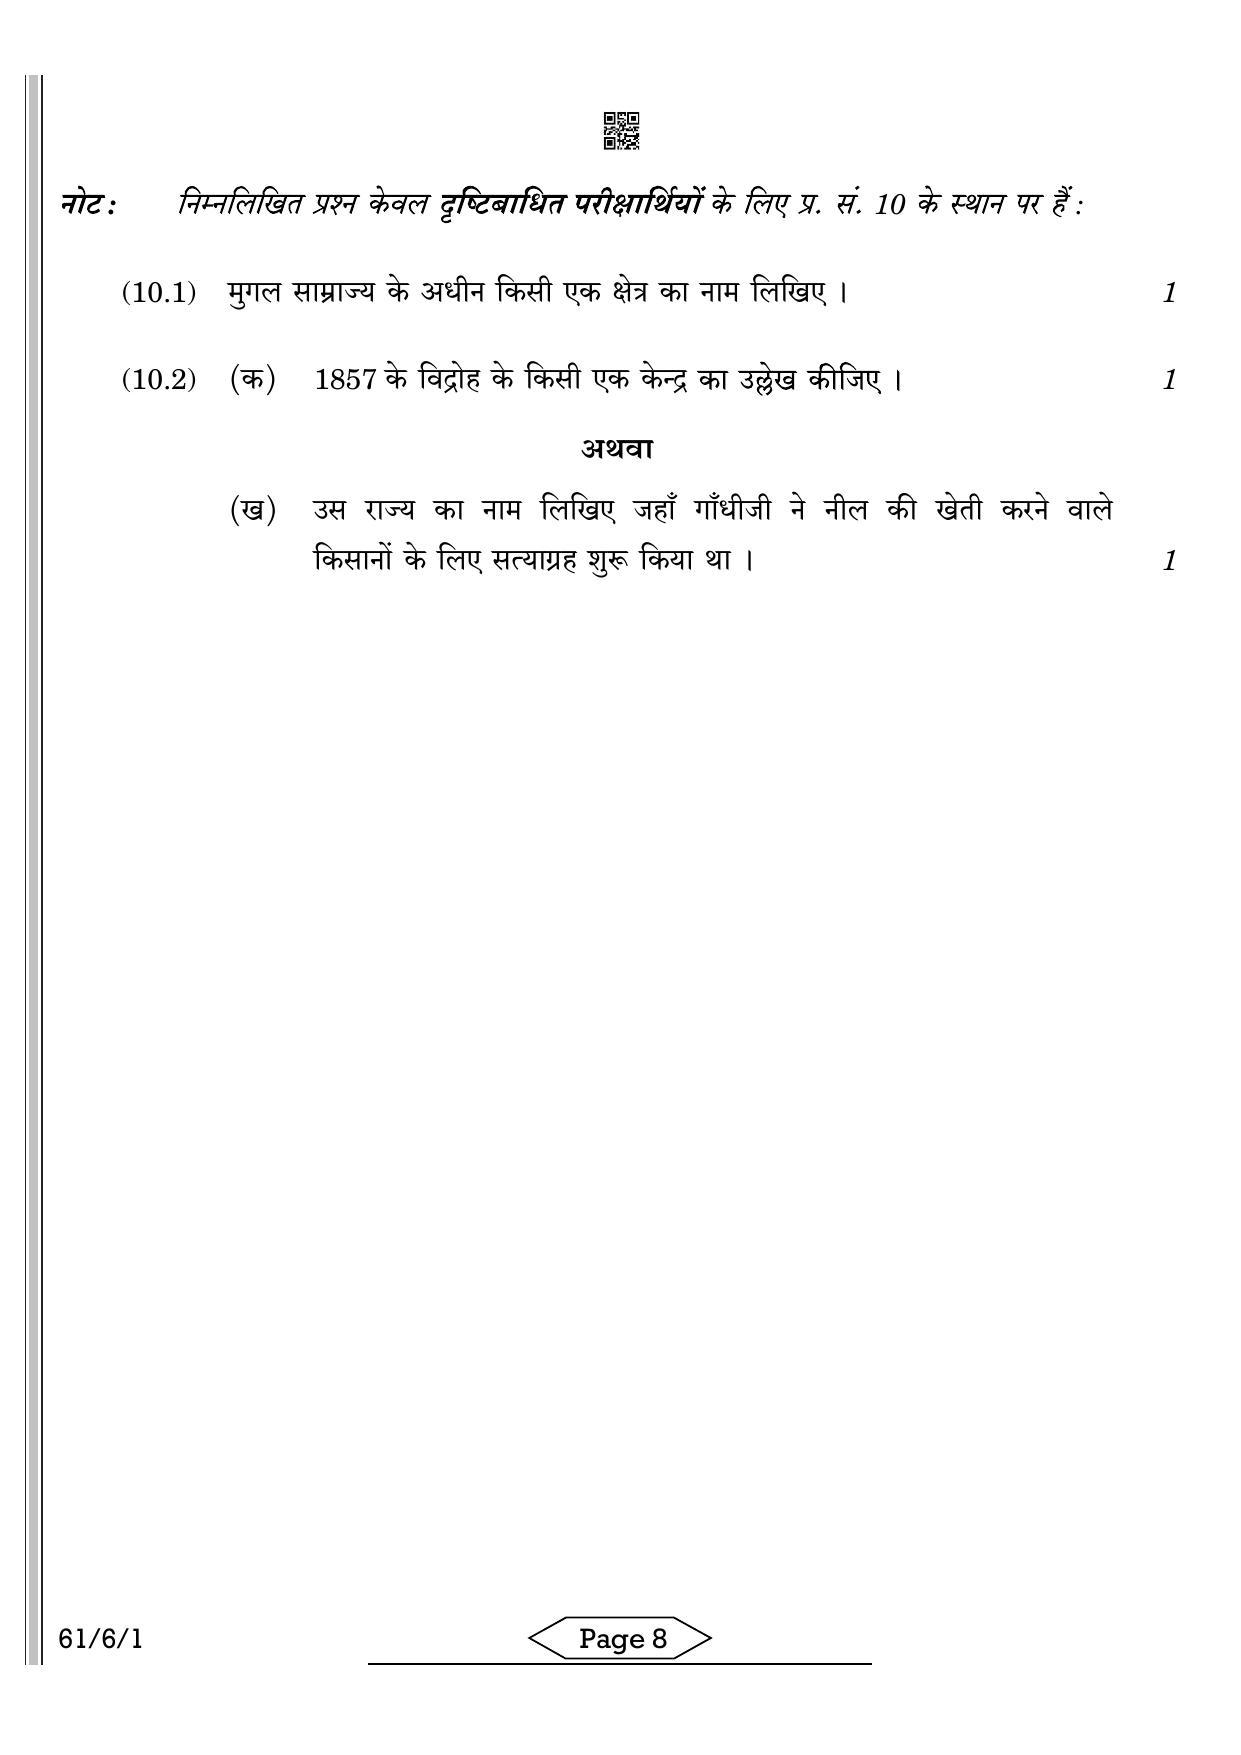 CBSE Class 12 61-6-1 HISTORY 2022 Compartment Question Paper - Page 8